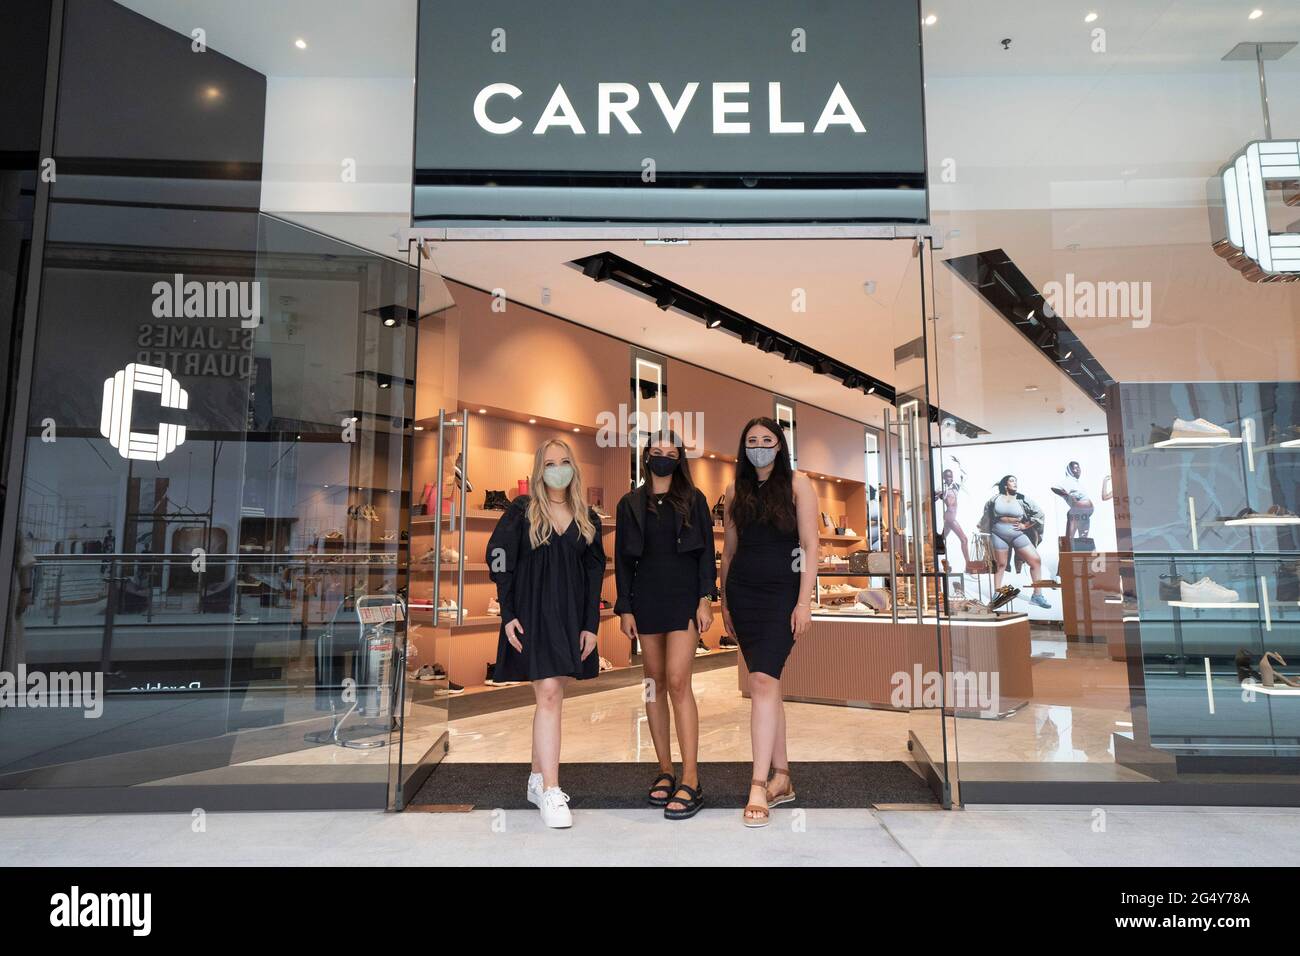 Edinburgh, Scotland, UK. 24 June 2021. First images of the new St James Quarter which opened this morning in Edinburgh. The large retail and residential complex replaced the St James Centre which occupied the site for many years. Pic; Staff at Carvela pose after opening doors for the first time. Iain Masterton/Alamy Live News Stock Photo